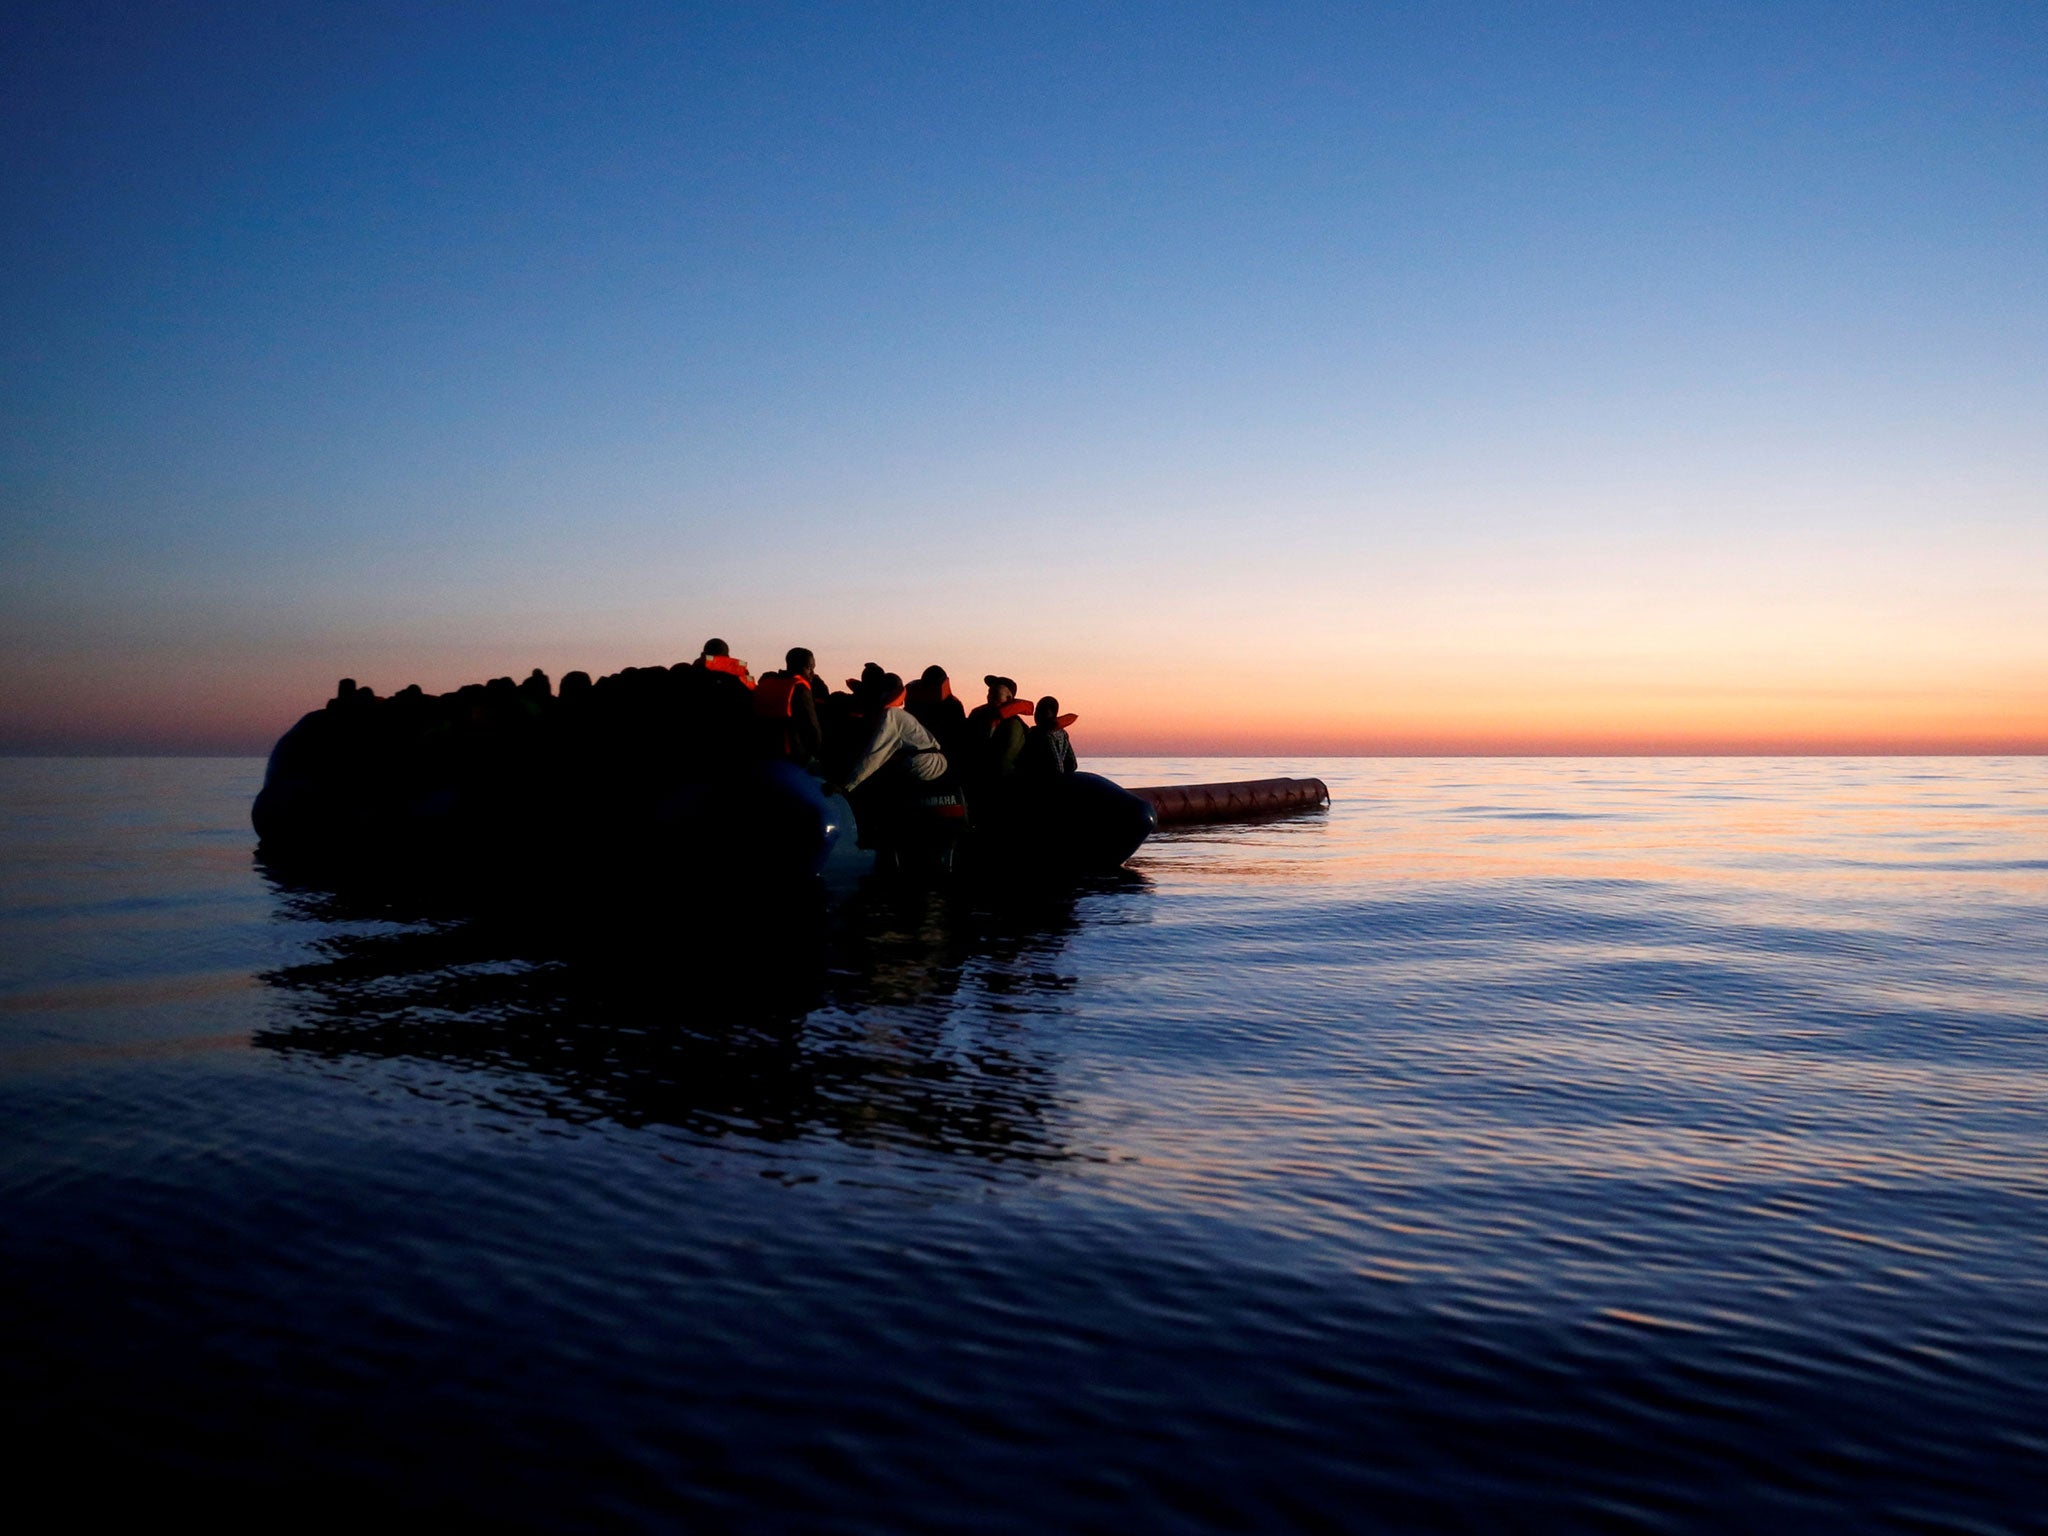 Refugees on a rubber dinghy await rescue at dawn in the central Mediterranean